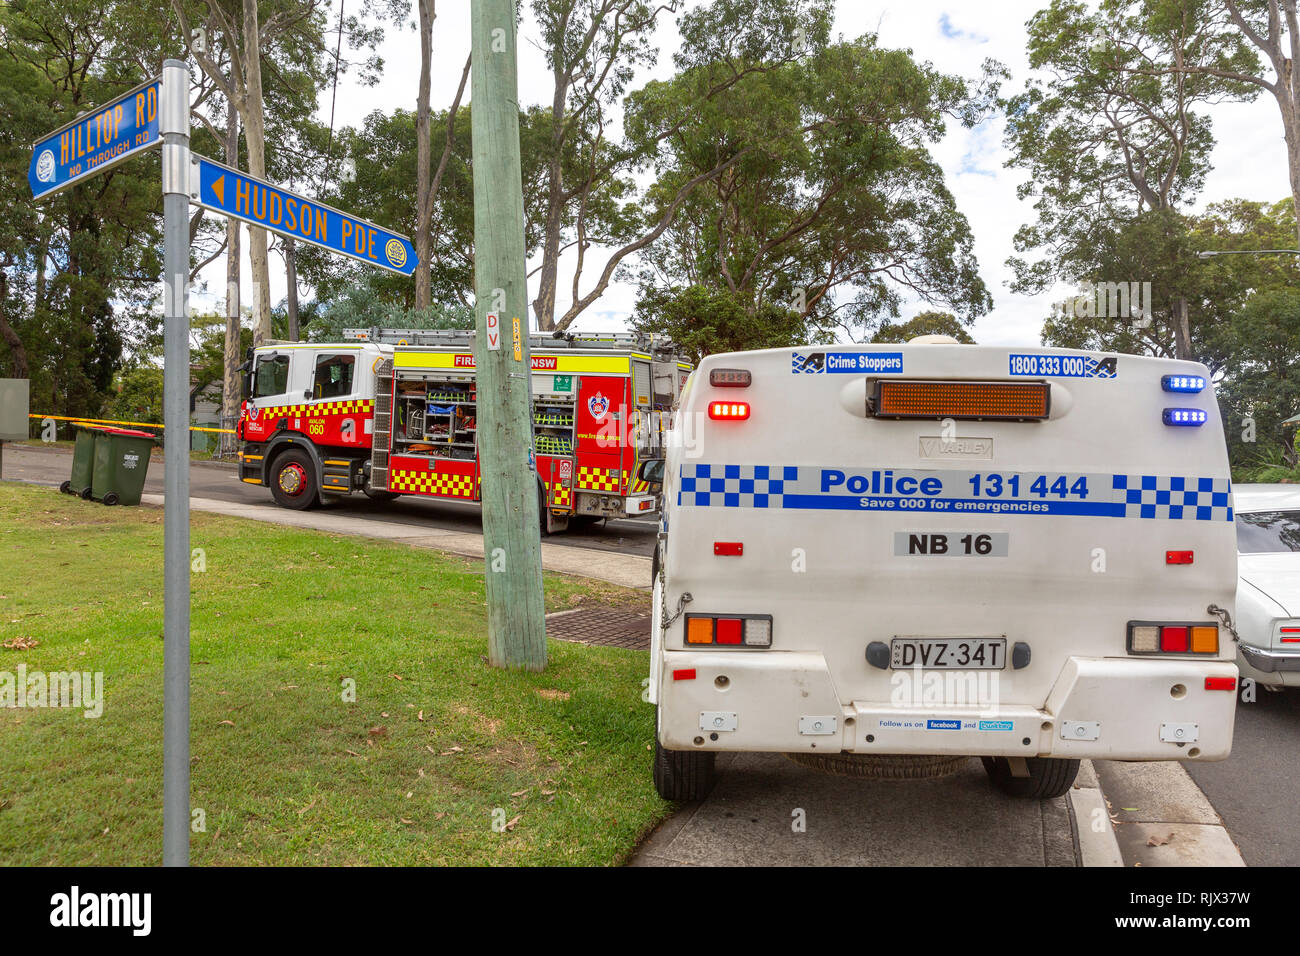 New South Wales fire and rescue truck and nsw police car attend to a fallen tree on Sydney northern beaches,Australia Stock Photo